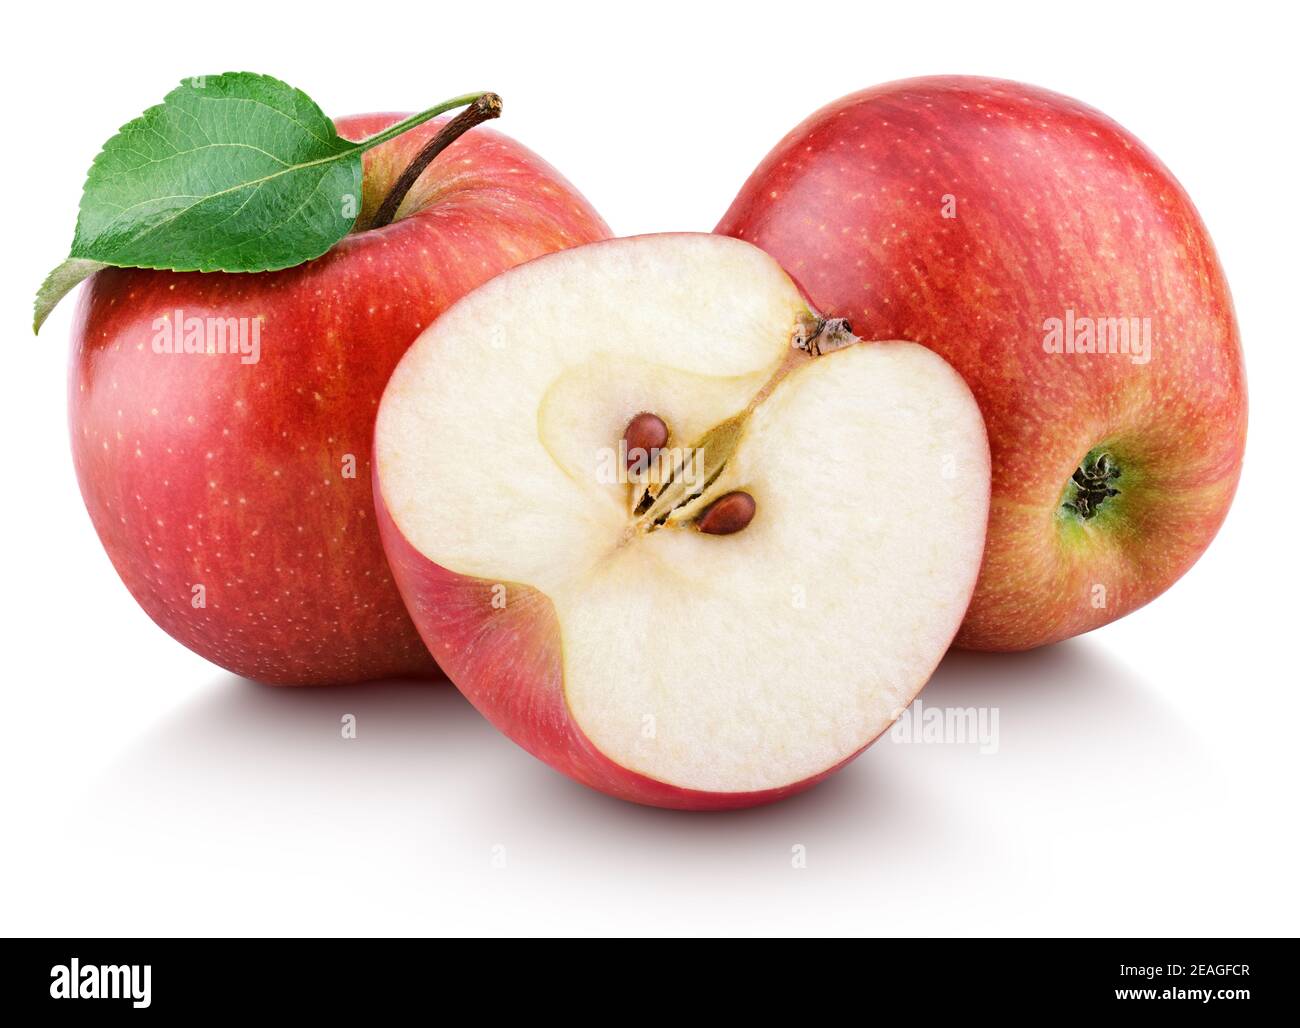 Ripe red apple fruit with apple half and green leaf isolated on white background. Red apples and leaf with clipping path Stock Photo